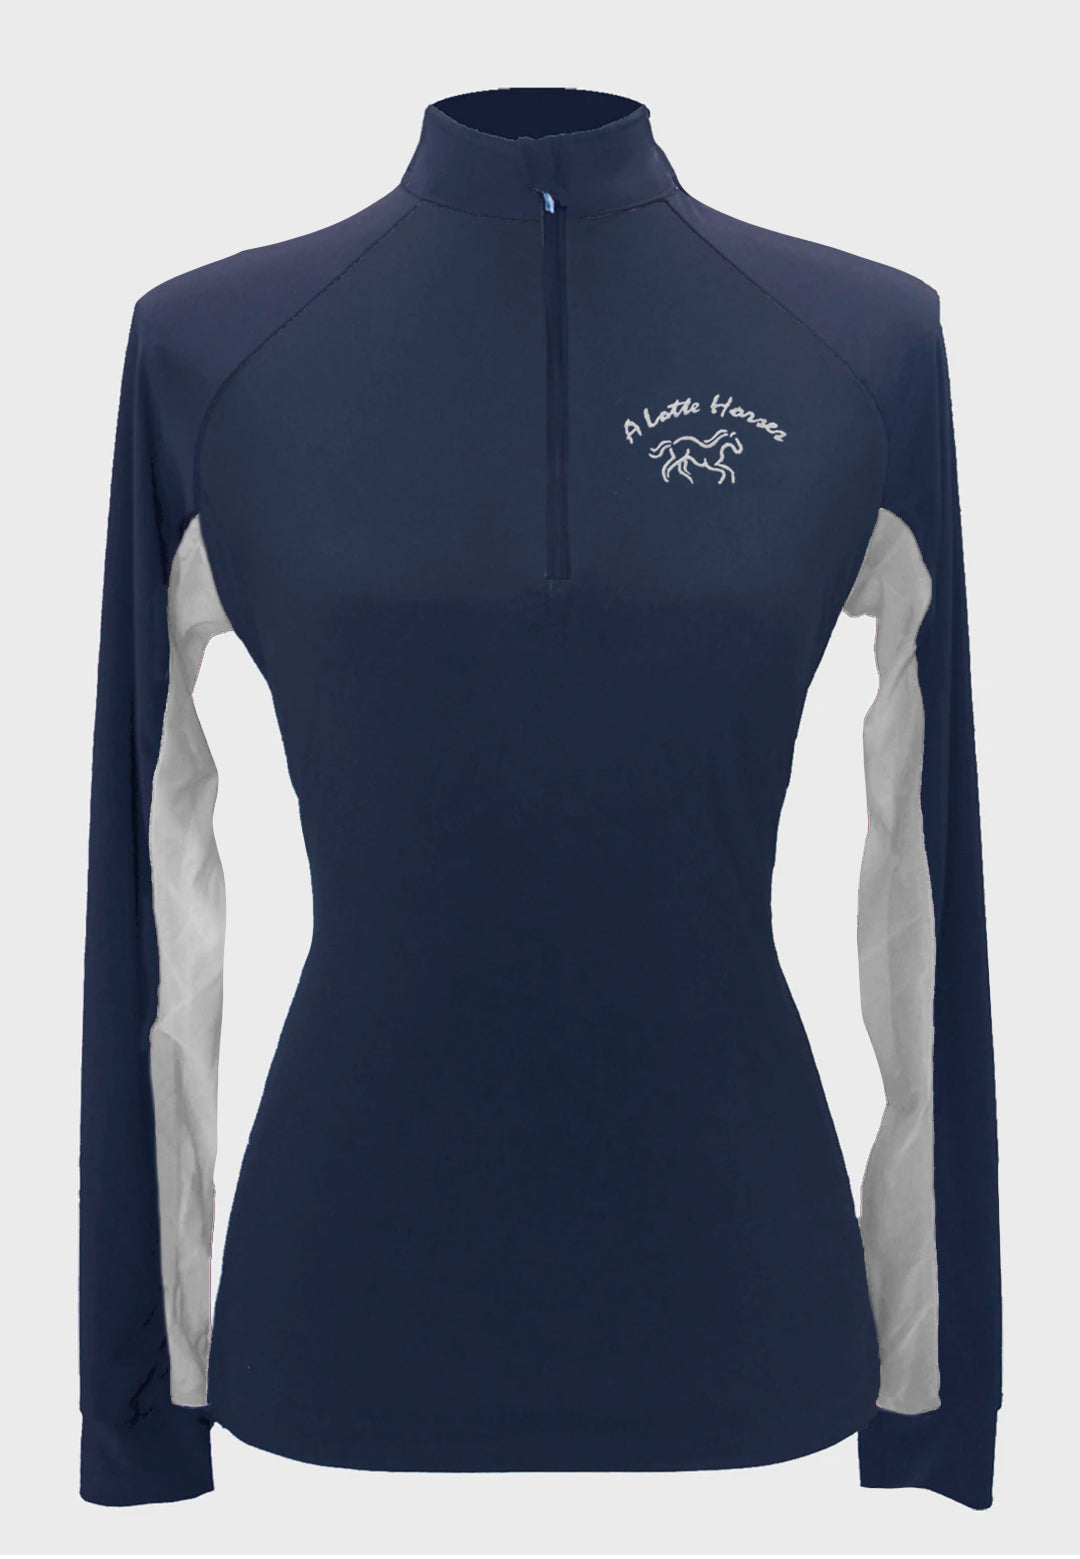 A Lotte Horses Navy Custom Sun Shirt  - Adult and Youth Sizes